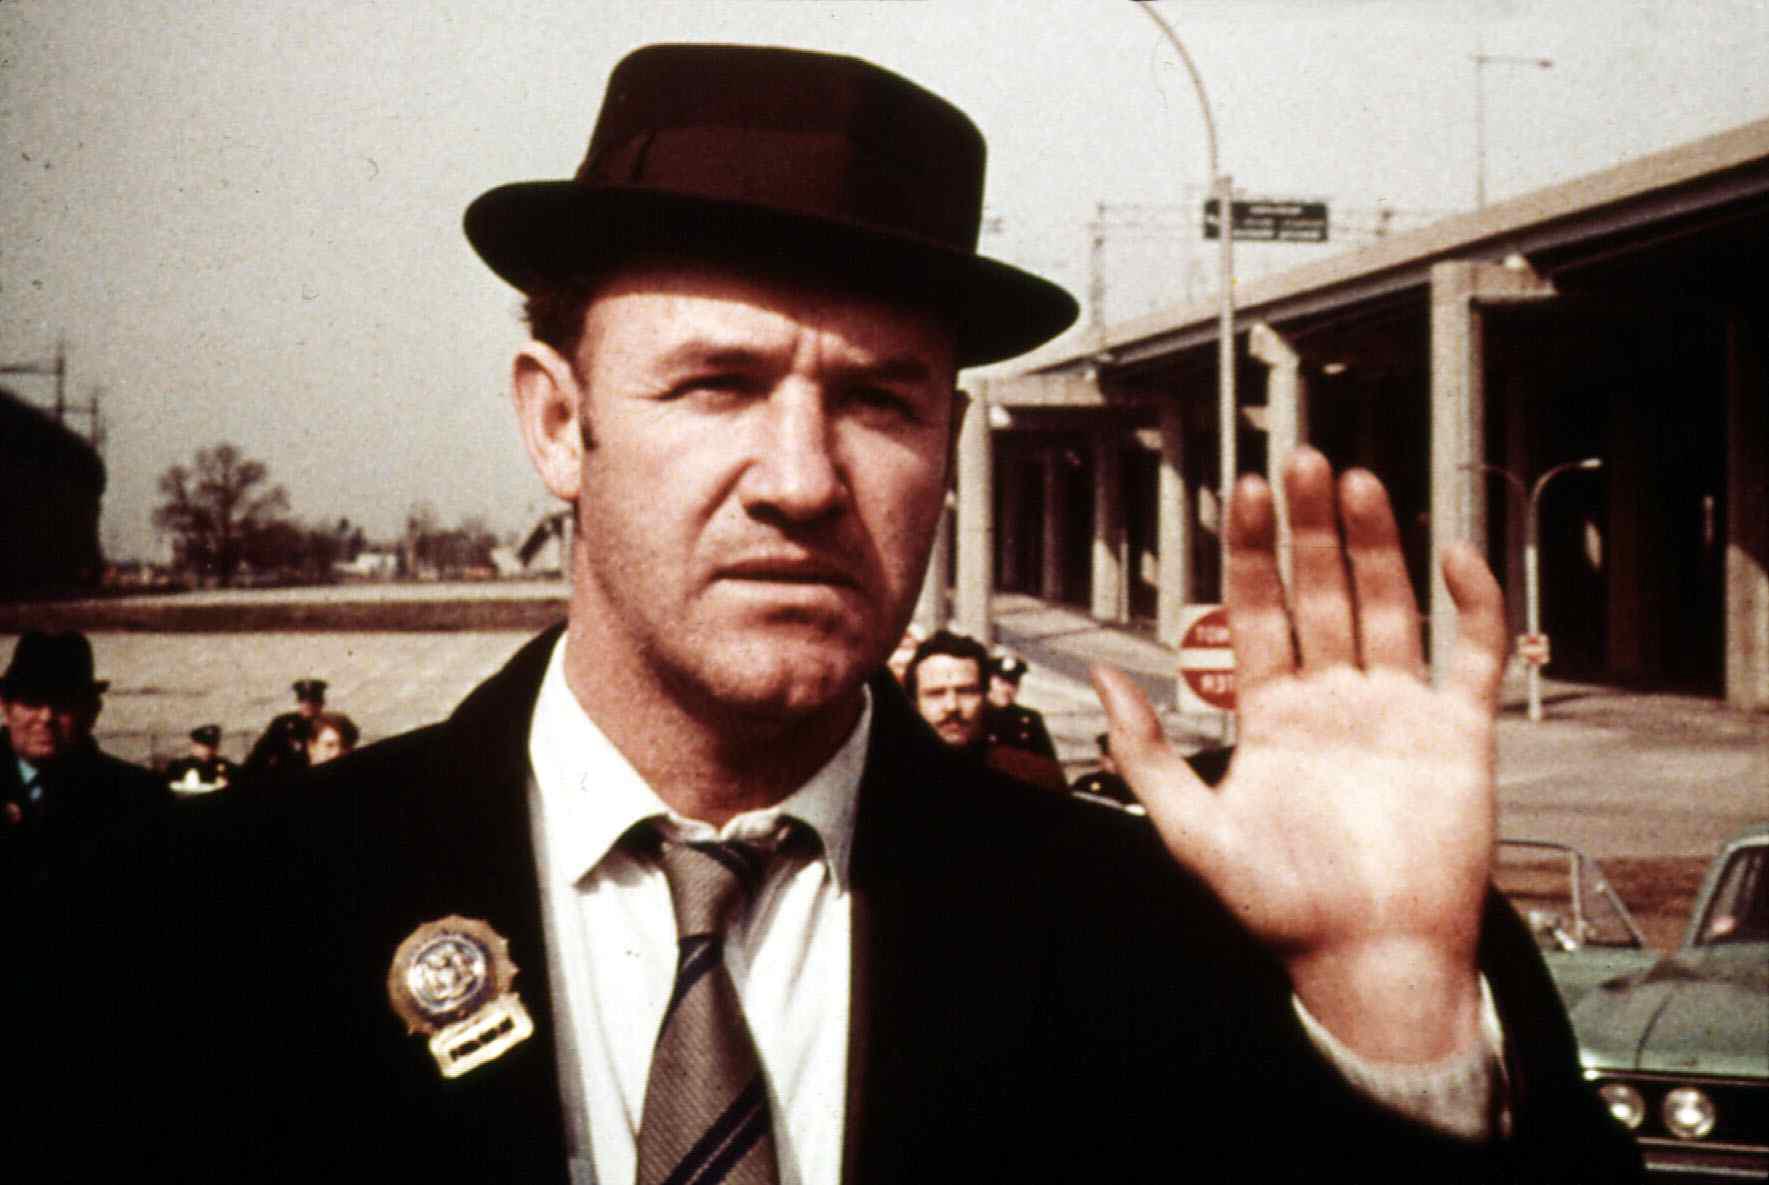 American actor Gene Hackman pictured in the movie "The French Connection" | Source: Getty Images